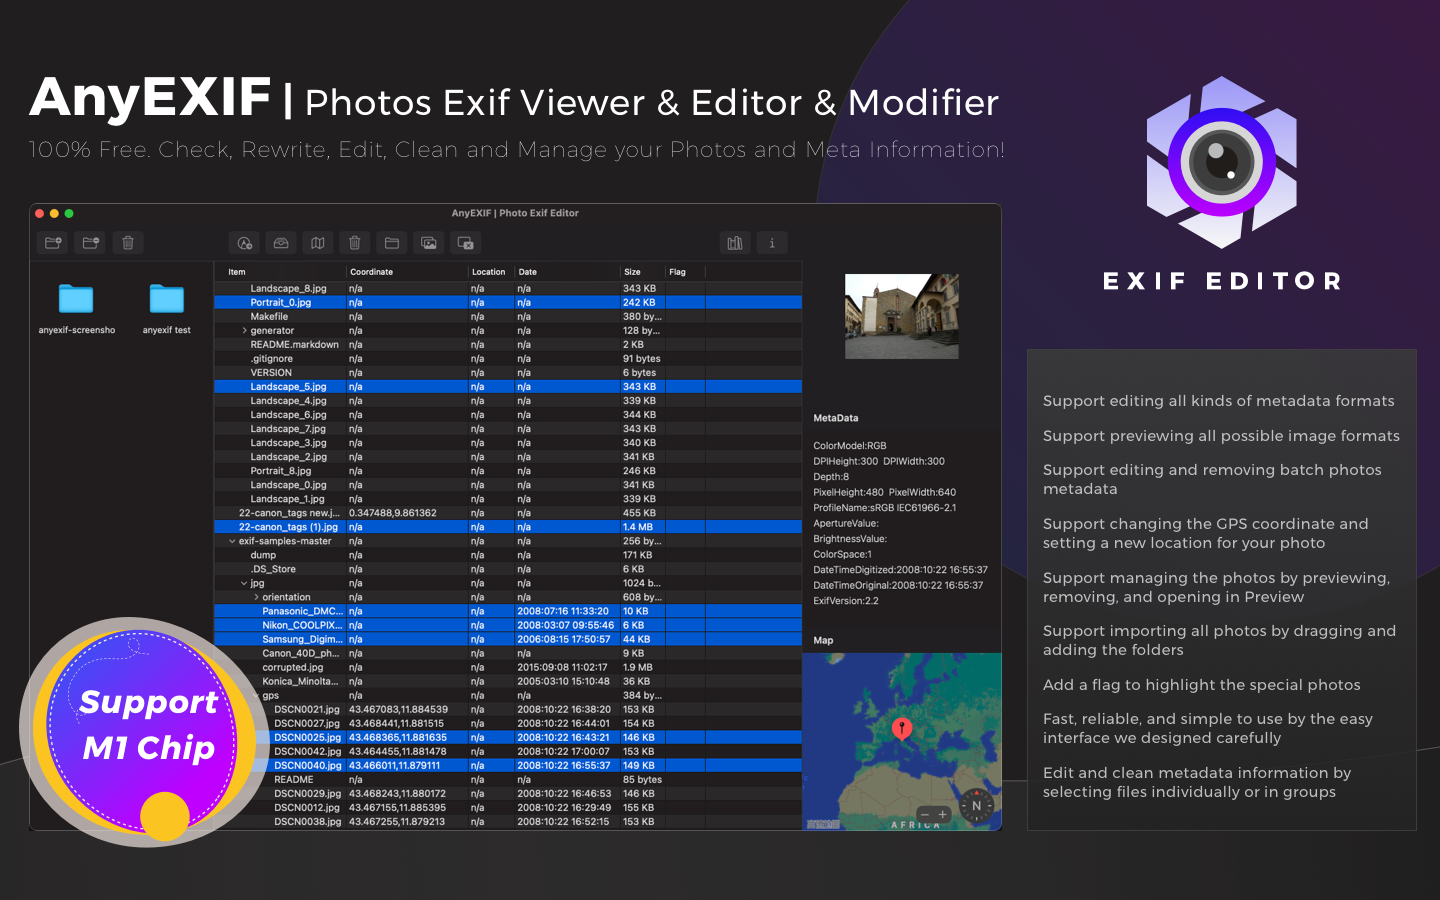 Exif Editor 1.2 : Photos Exif viewer & Editor & Modifier. 100% Free. Check, Rewrite, Edit, Clean and Manage your Photos and Meta Information!